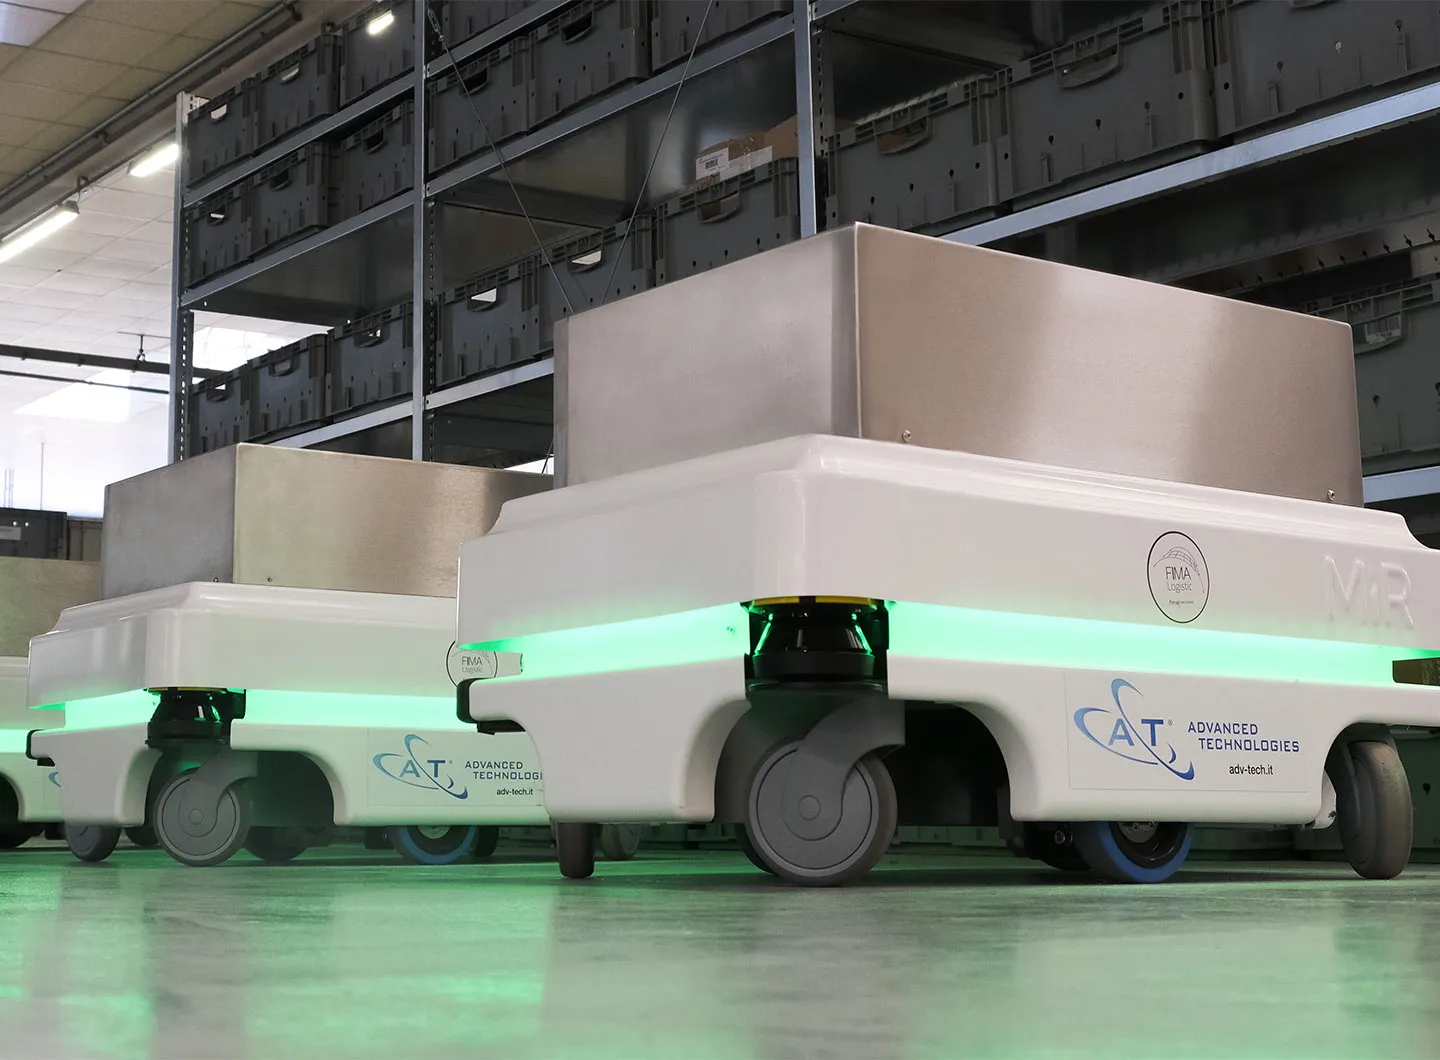 Agv - Automated Guided Vehicle